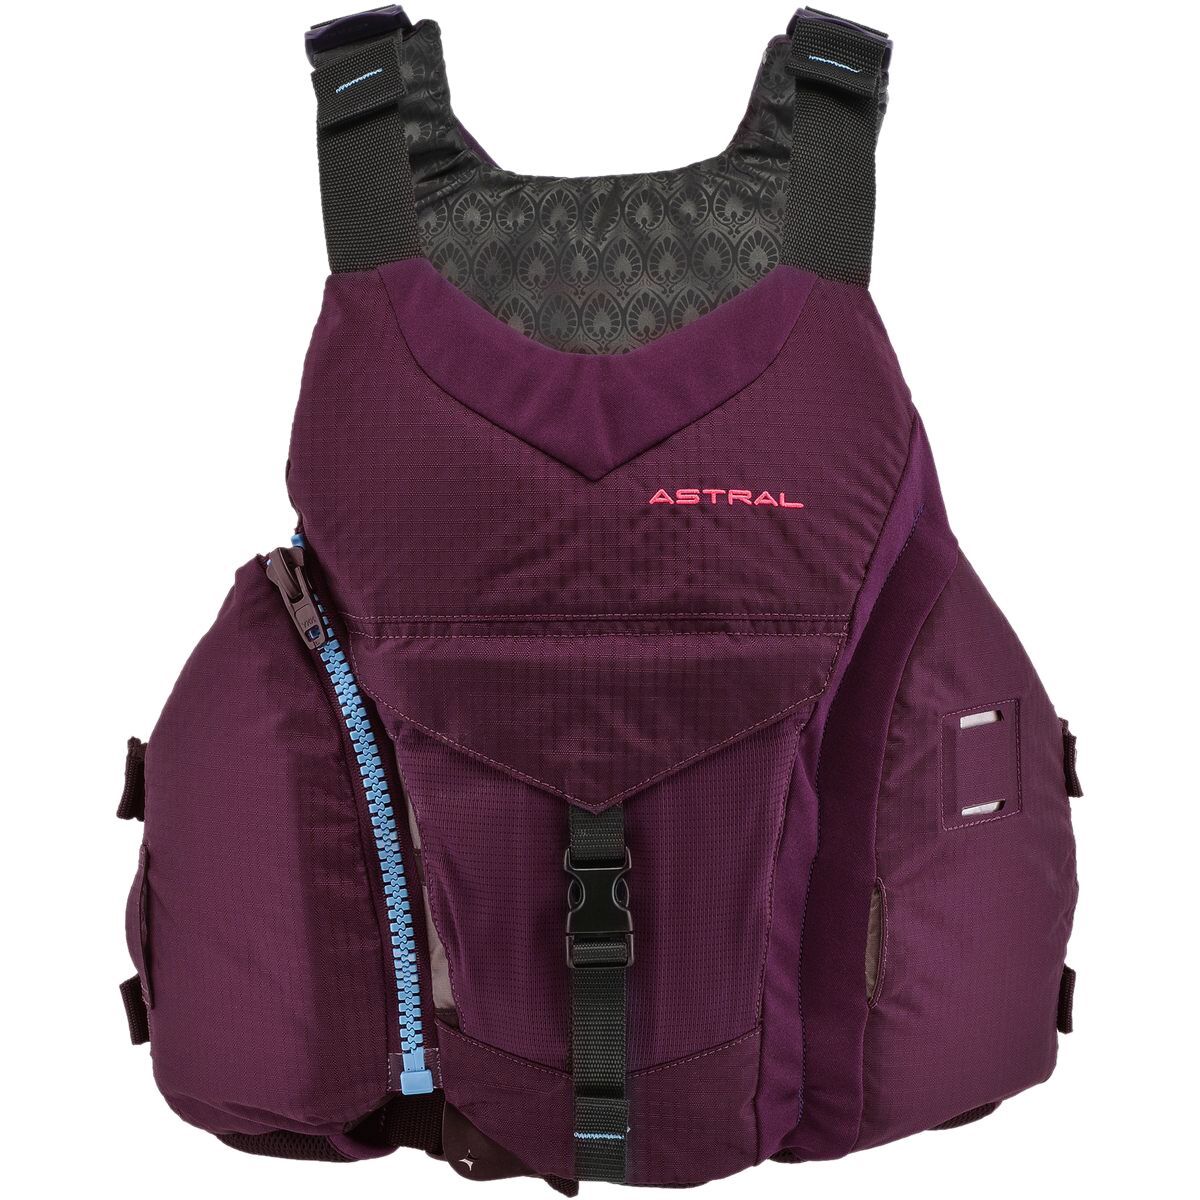 Astral Layla Personal Flotation Device - Women's